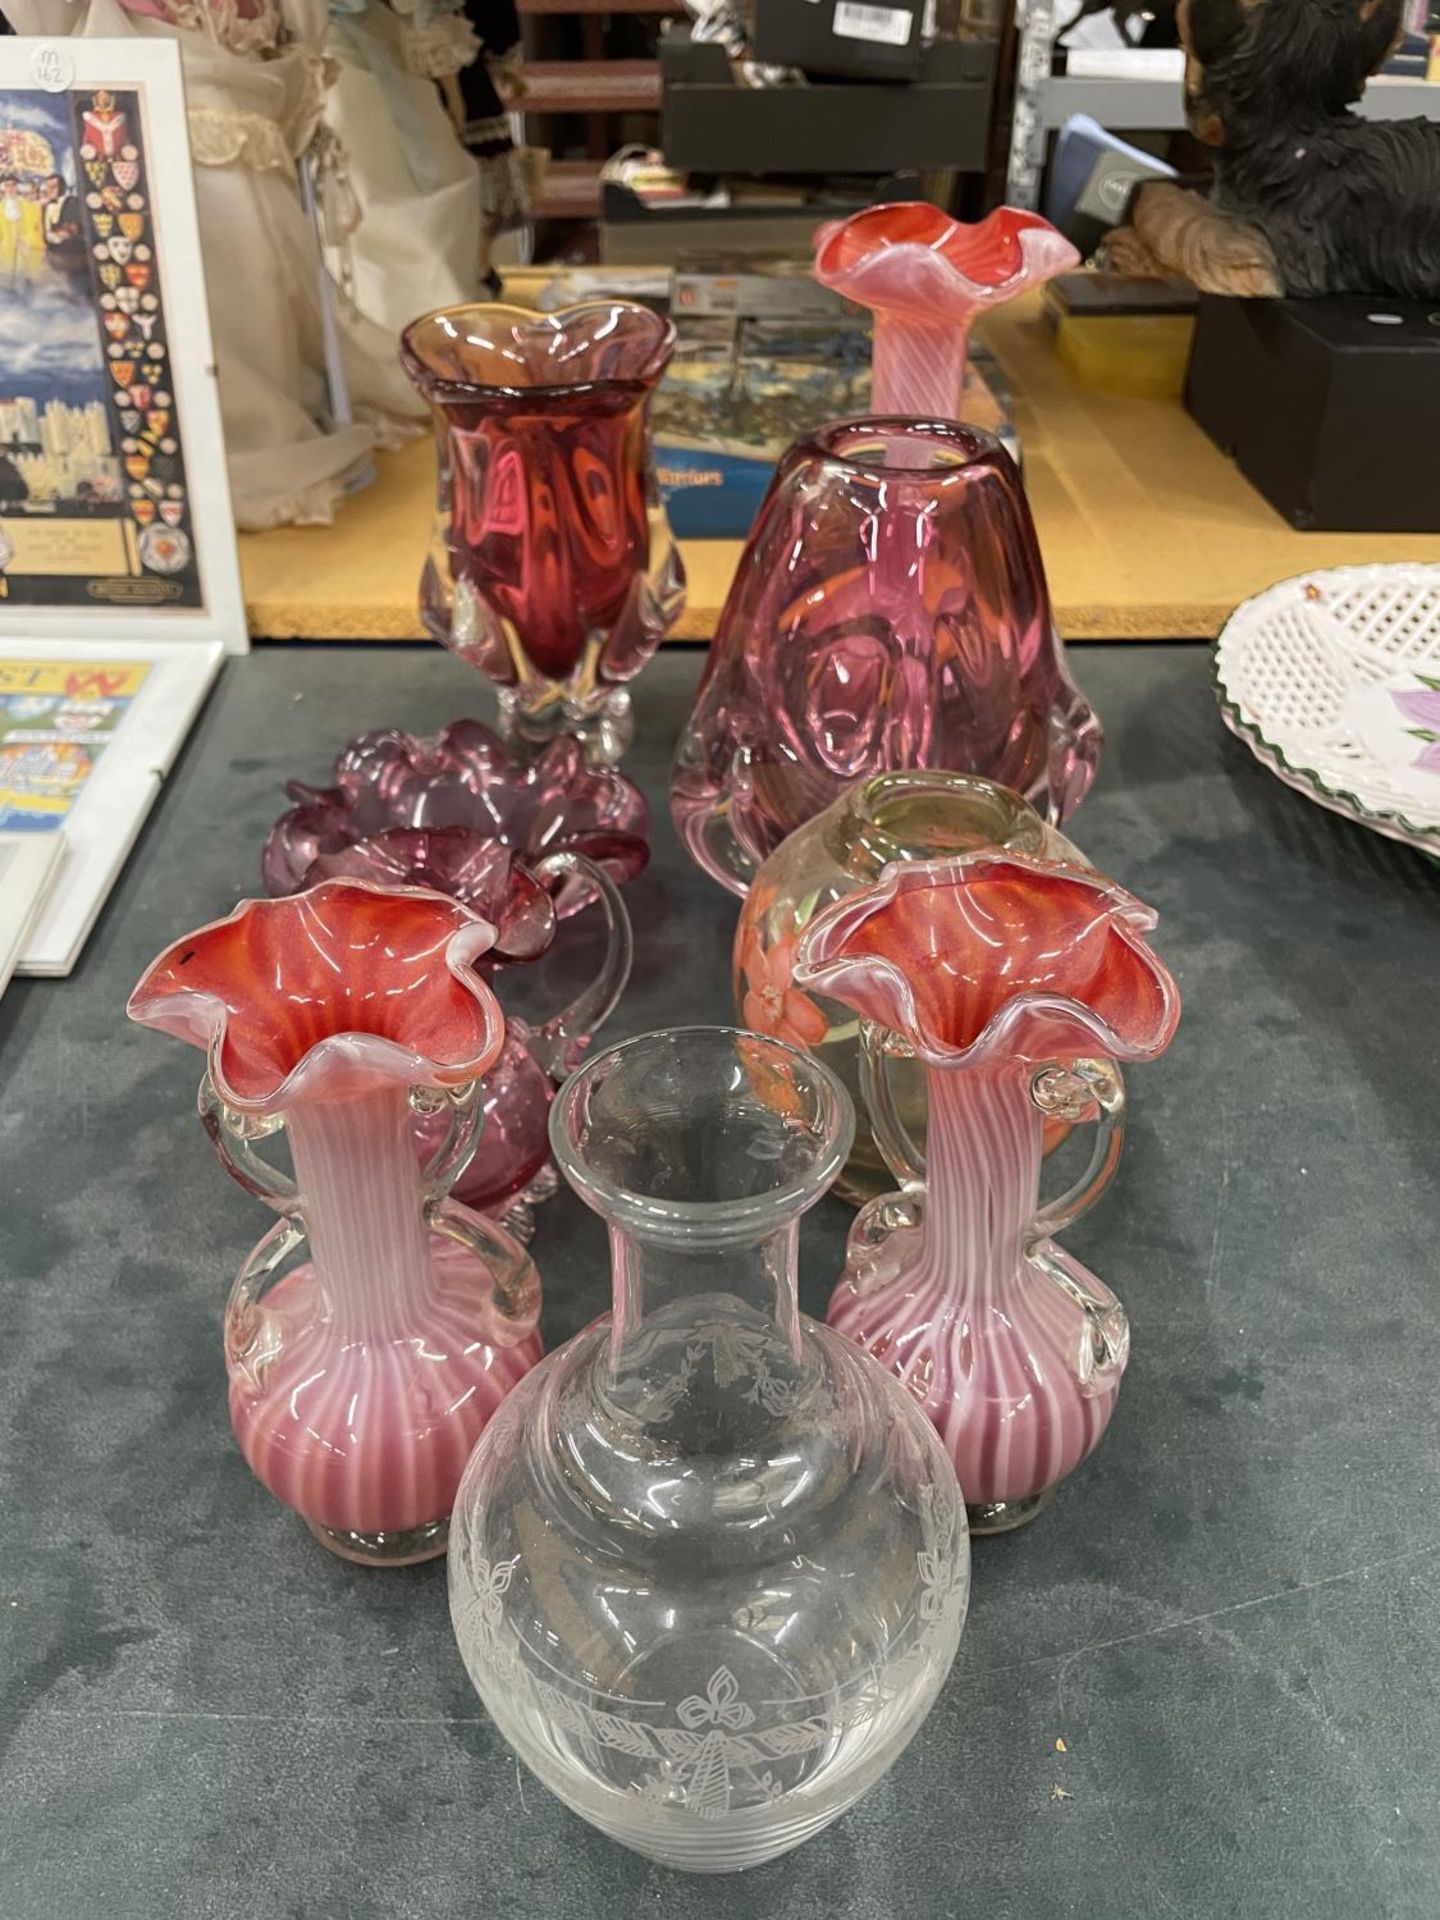 A QUANTITY OF COLOURED GLASSWARE TO INCLUDE VASES, A BOWL AND A JUG - 9 PIECES IN TOTAL